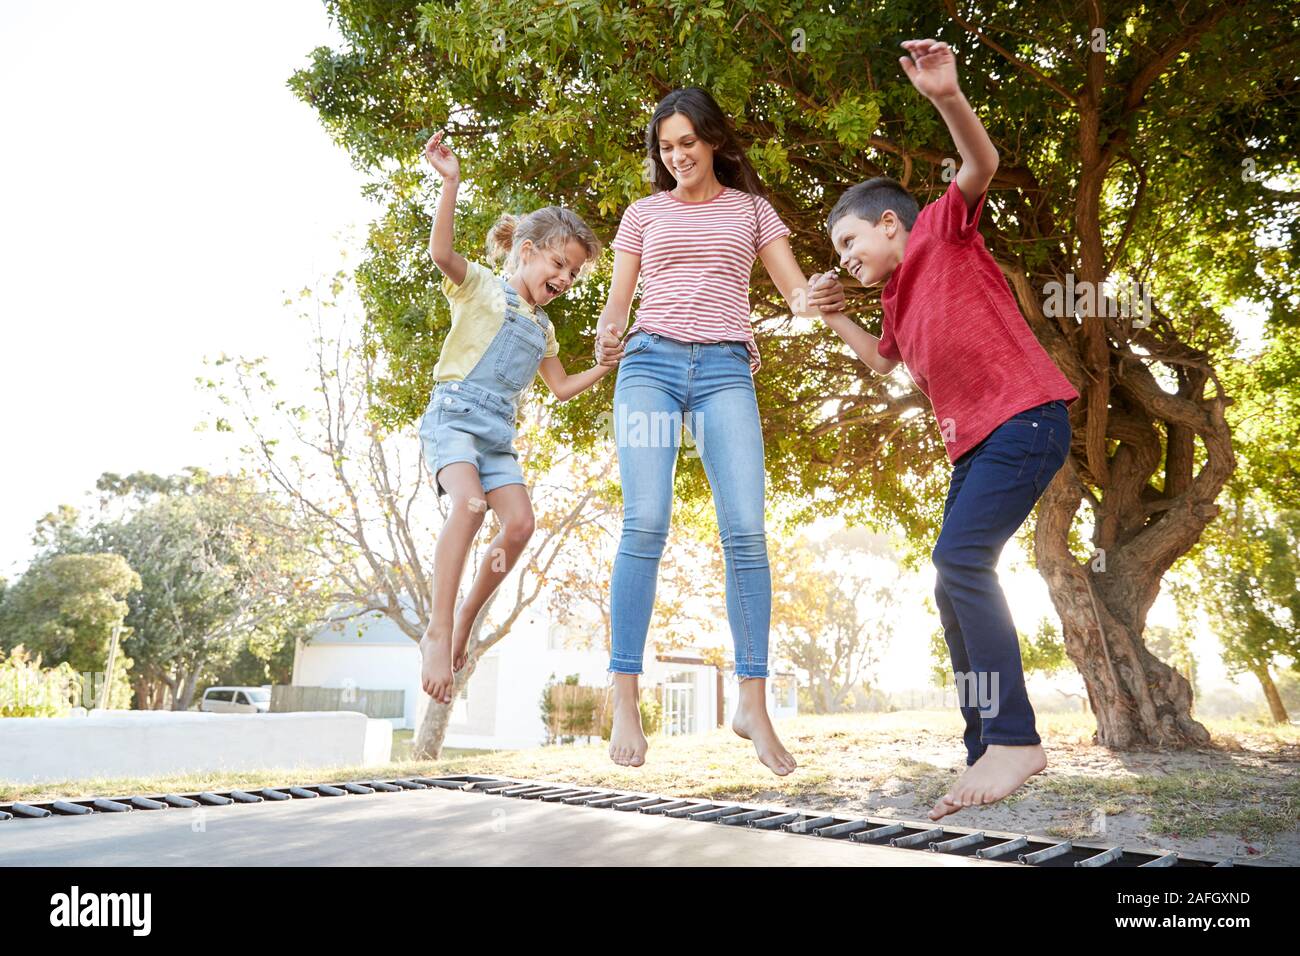 Siblings With Teenage Sister Playing On Outdoor Trampoline In Garden Stock Photo